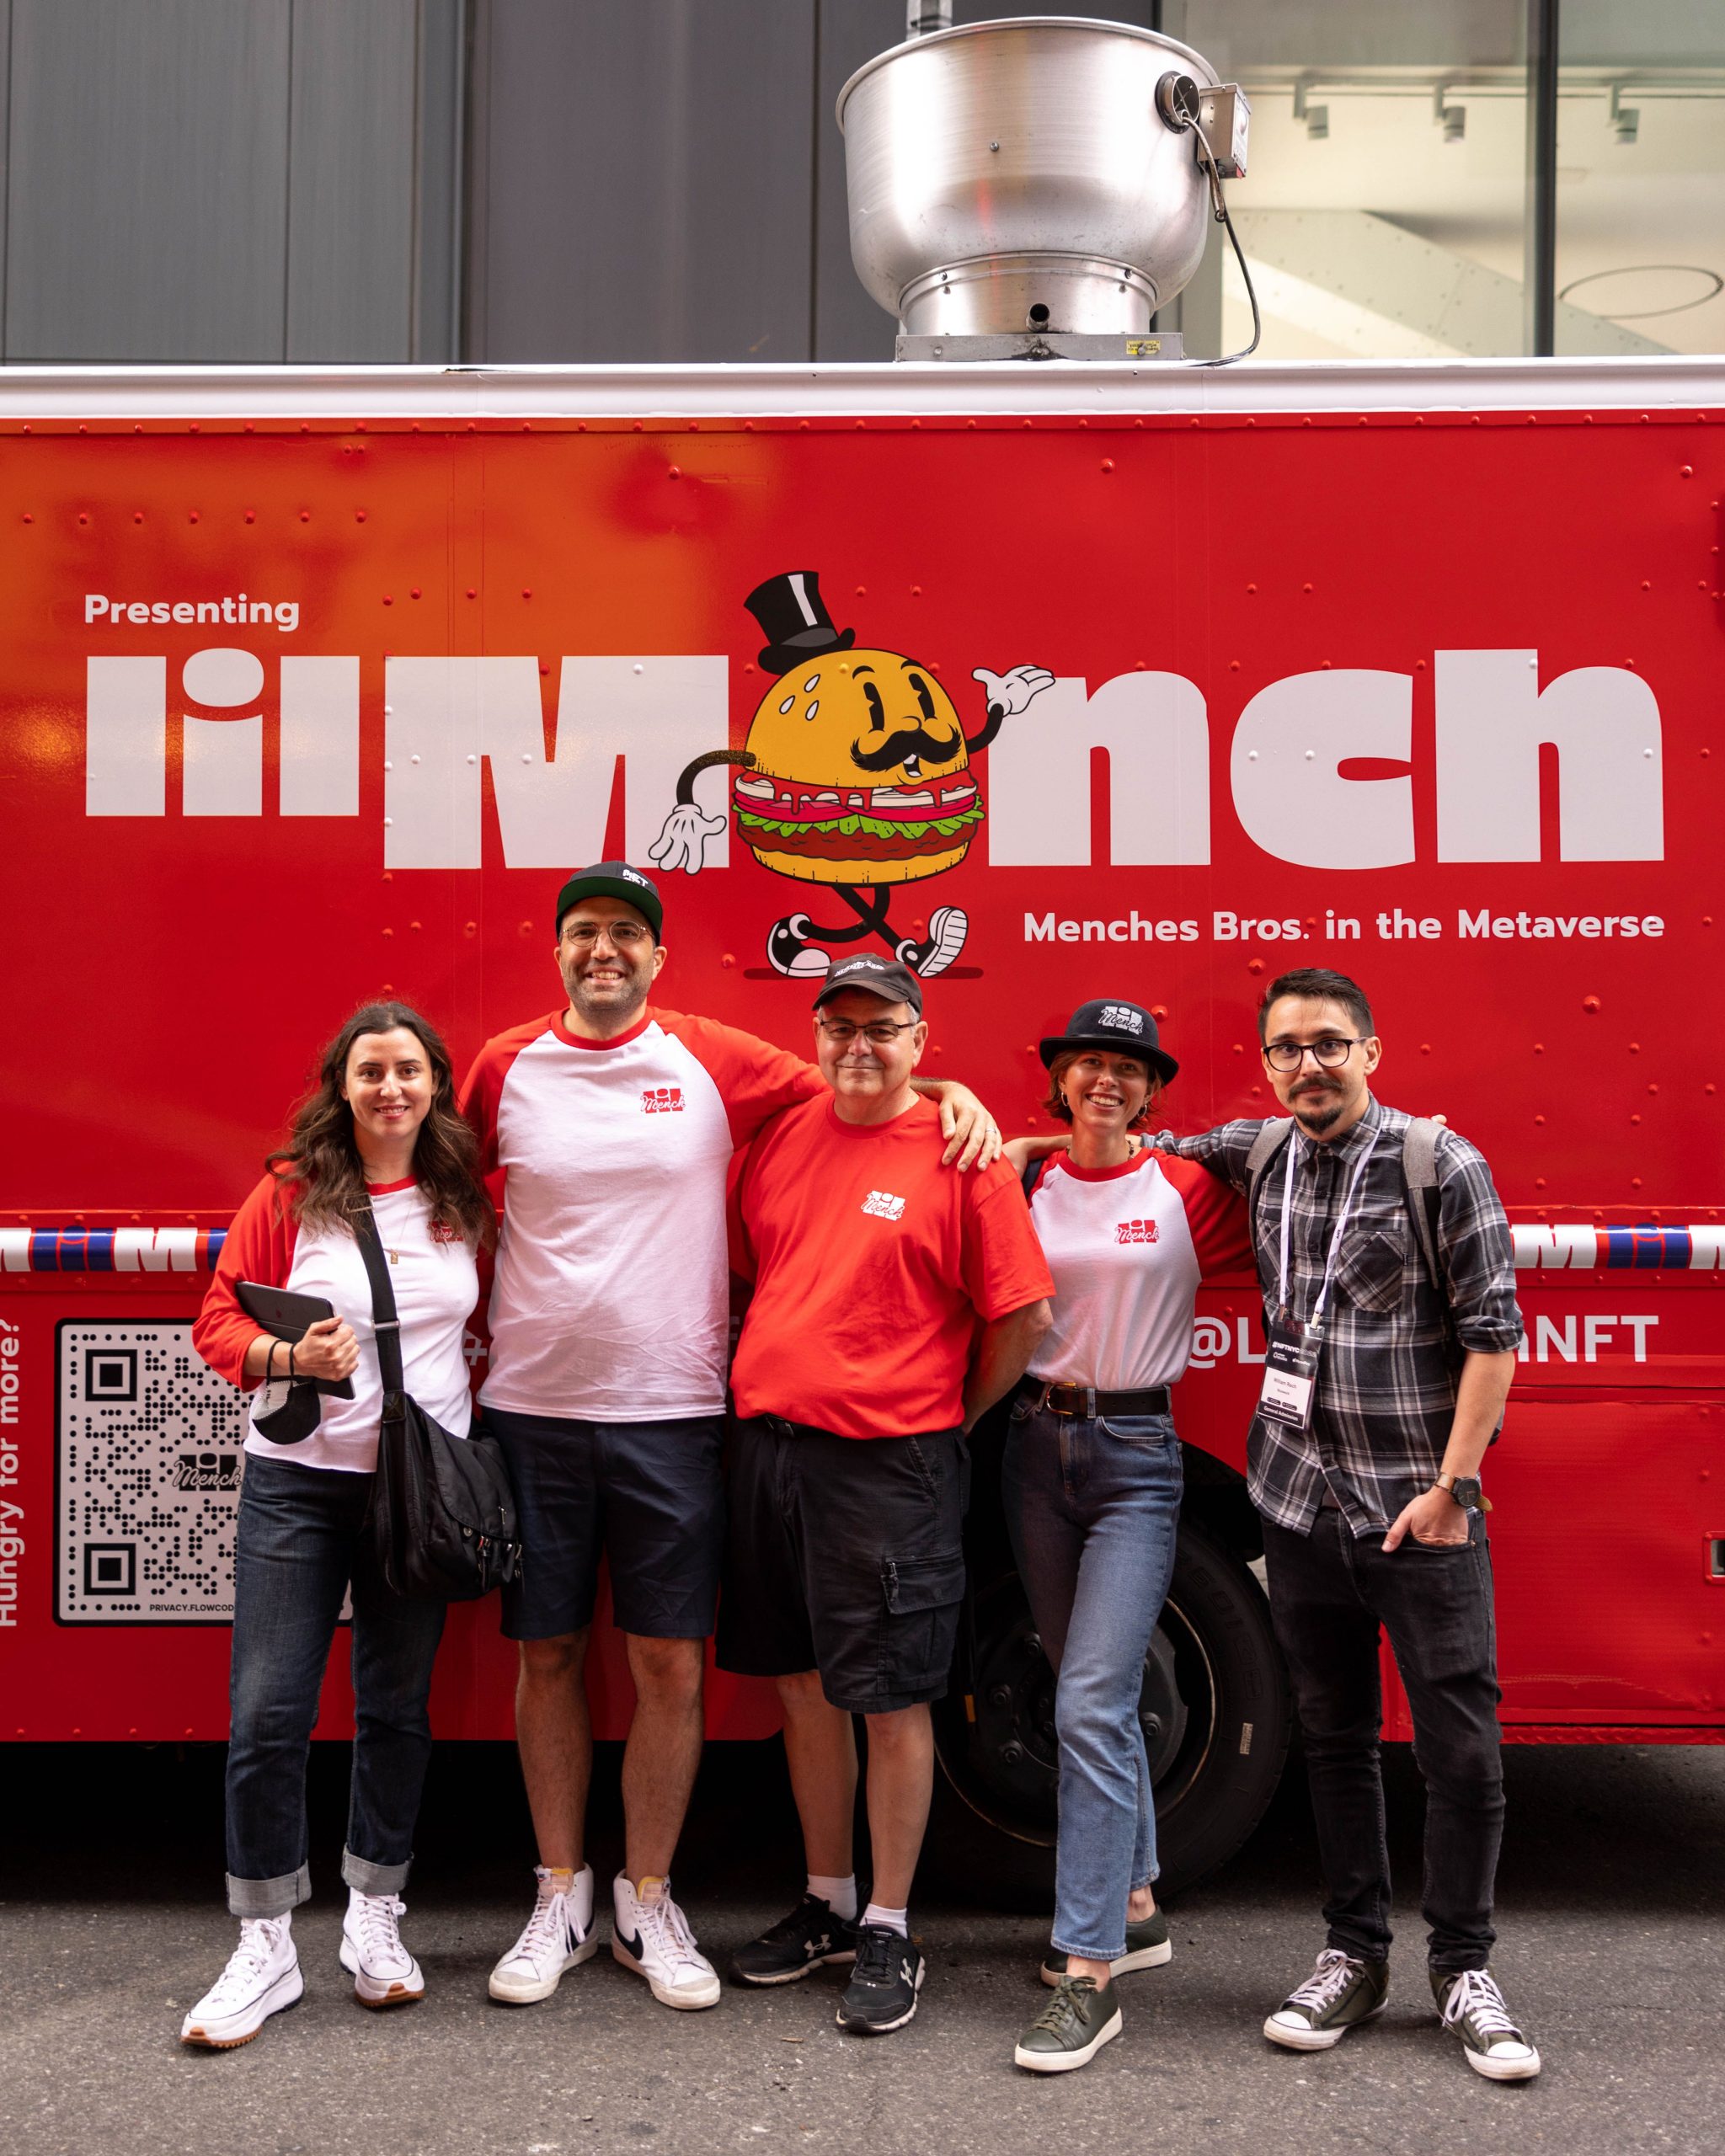 Lil Mench branded food truck.